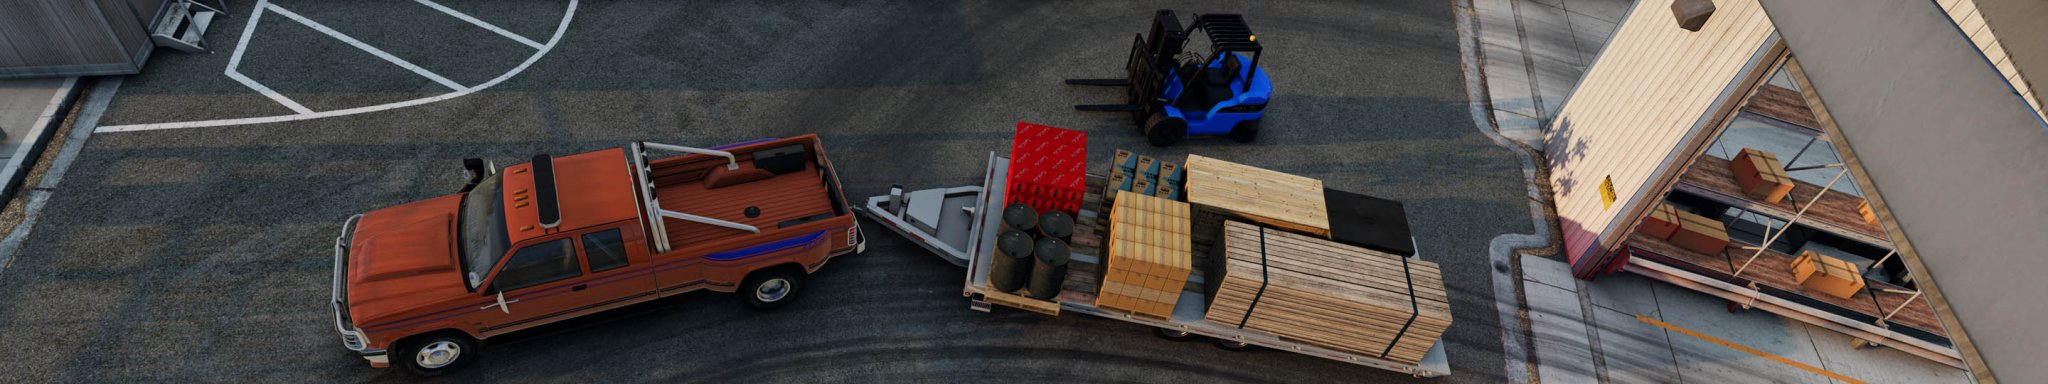 1 BeamNG WOLF FORKLIFT by TrackpadUser copy.jpg